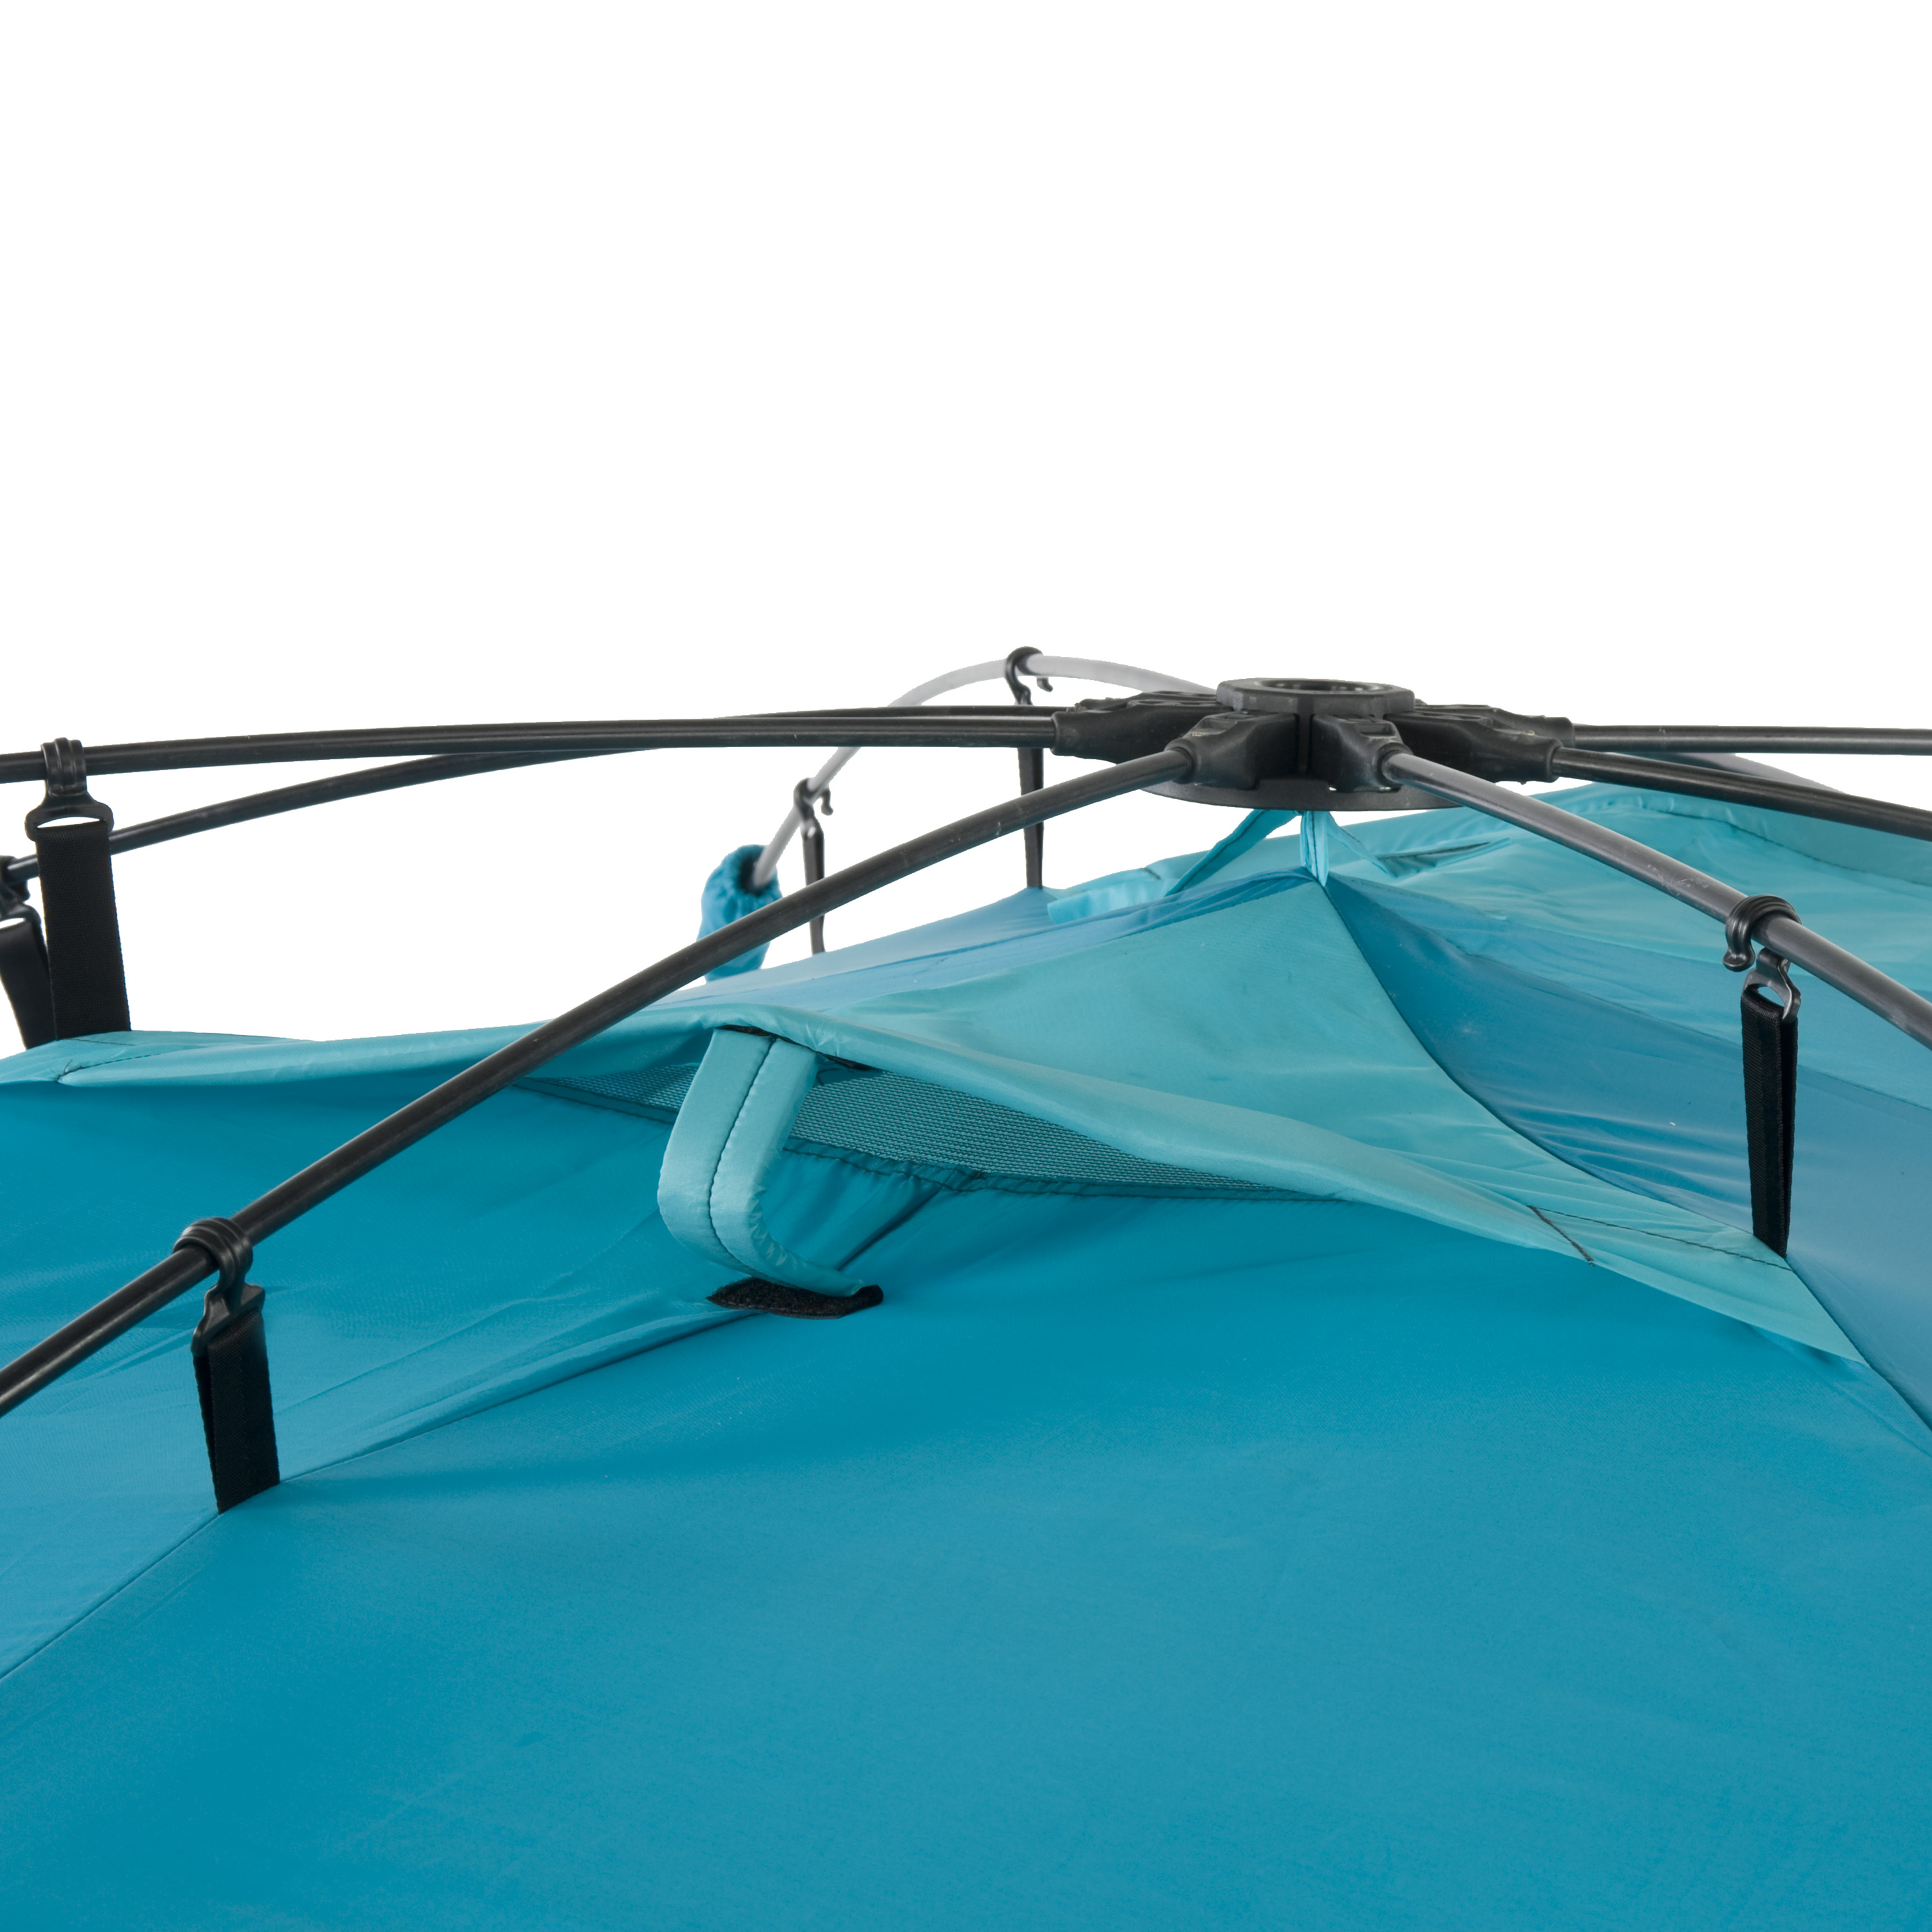 Ozark Trail 8' x 8' Instant Sun Shade (64 Square feet Coverage) - image 3 of 5